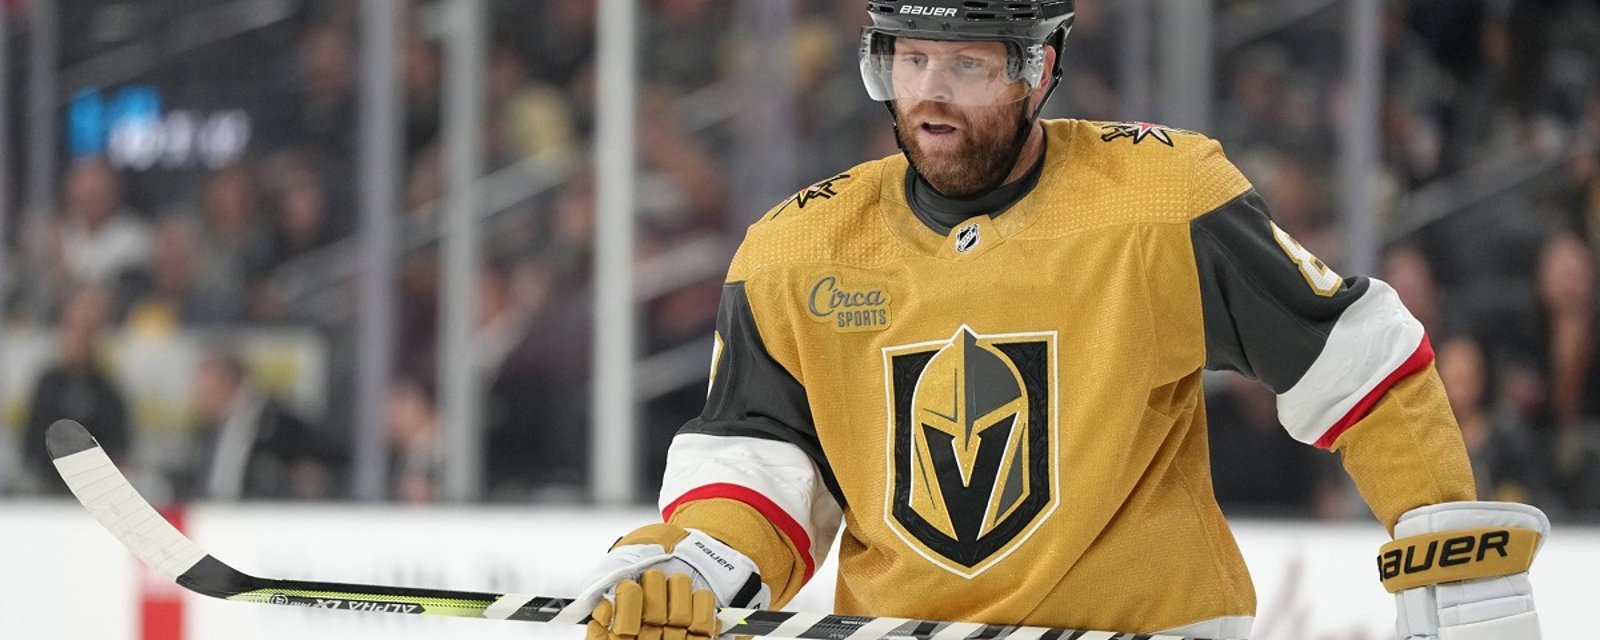 Phil Kessel earns a new nickname from the Golden Knights.